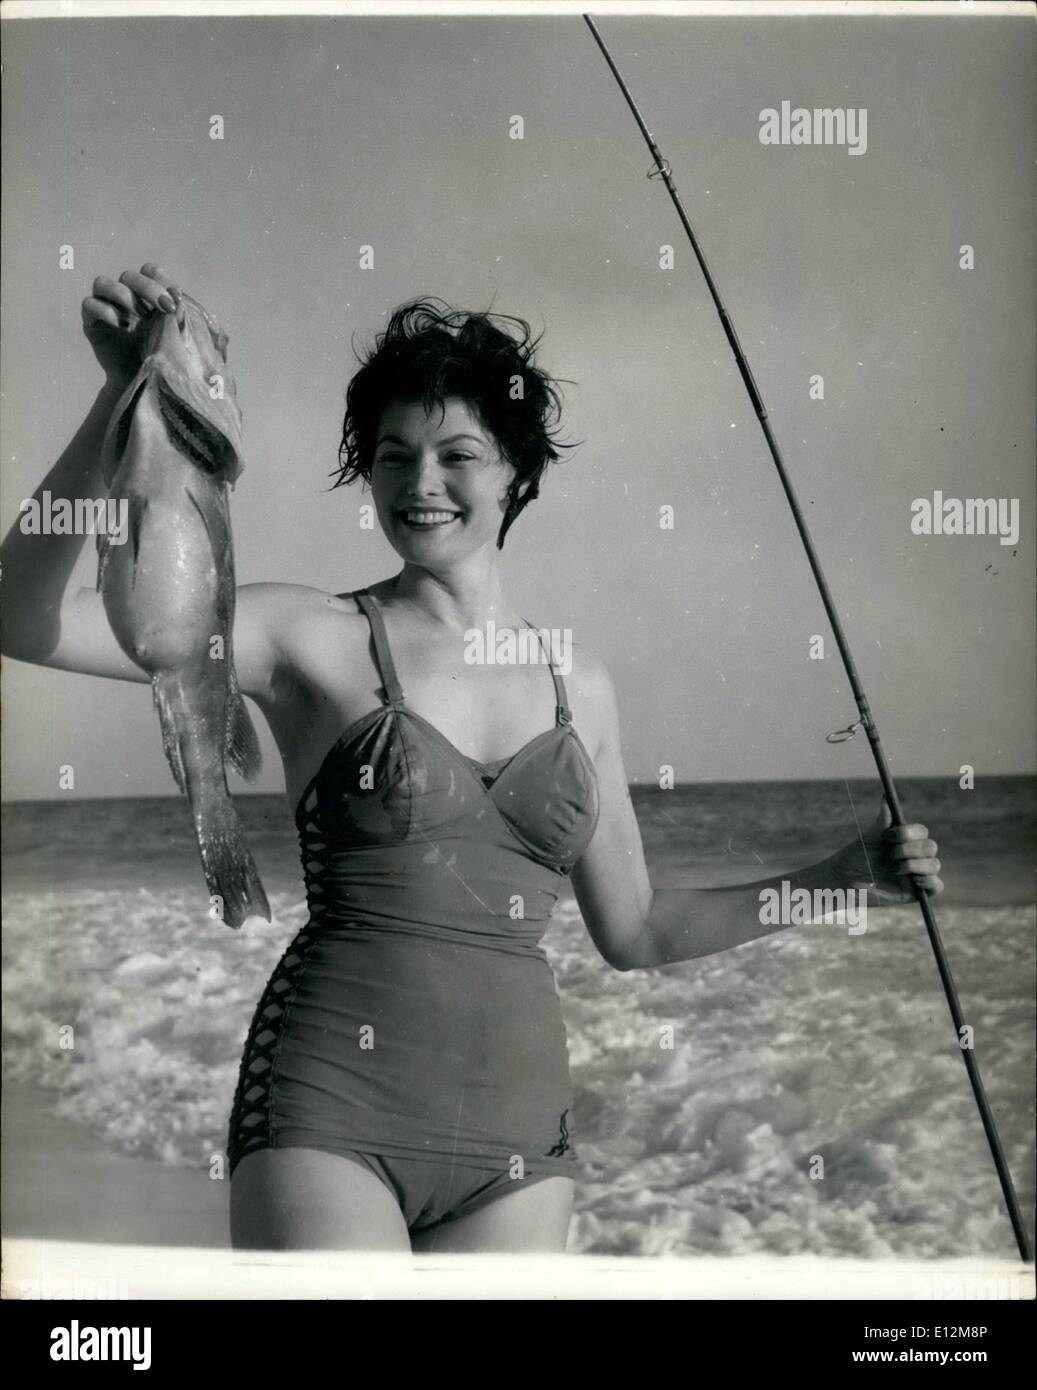 Feb. 24, 2012 - Helen loves surf fishing - and can enjoy her Sport any day in Bermuda's warm and Sunny clime: Often mistaken for Gene Tierney, young Helen Mann often takes time off from her job as a hostess in a Bermuda hotel and gets away from people by making for her favourite lonely beach; There she enjoys a spot of surf fishing for hamlet. Even if she catches nothing, there's the solitude and the surf and spray. Helen hails from Chicago, once was a New York model, and has lived in India and Hong Kong Stock Photo